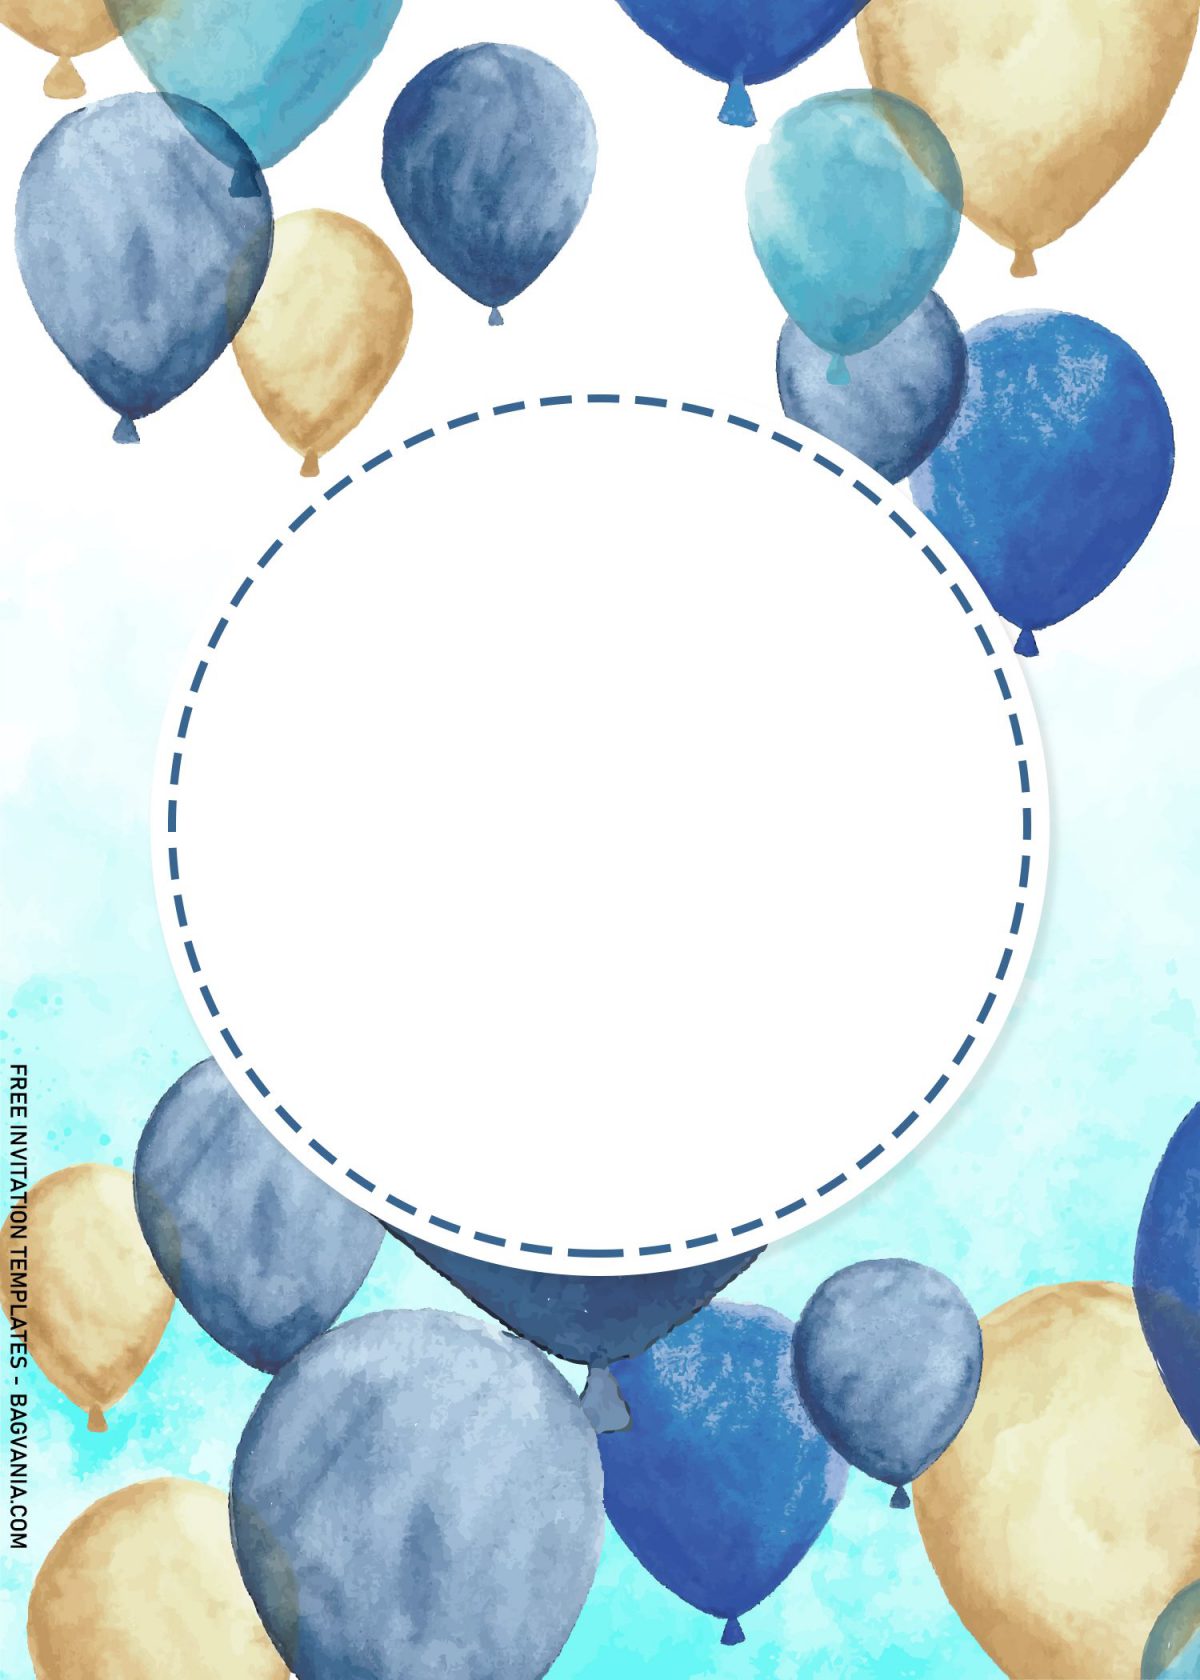 8+ Beautiful Watercolor Balloons Birthday Invitation Templates with blue watercolor background